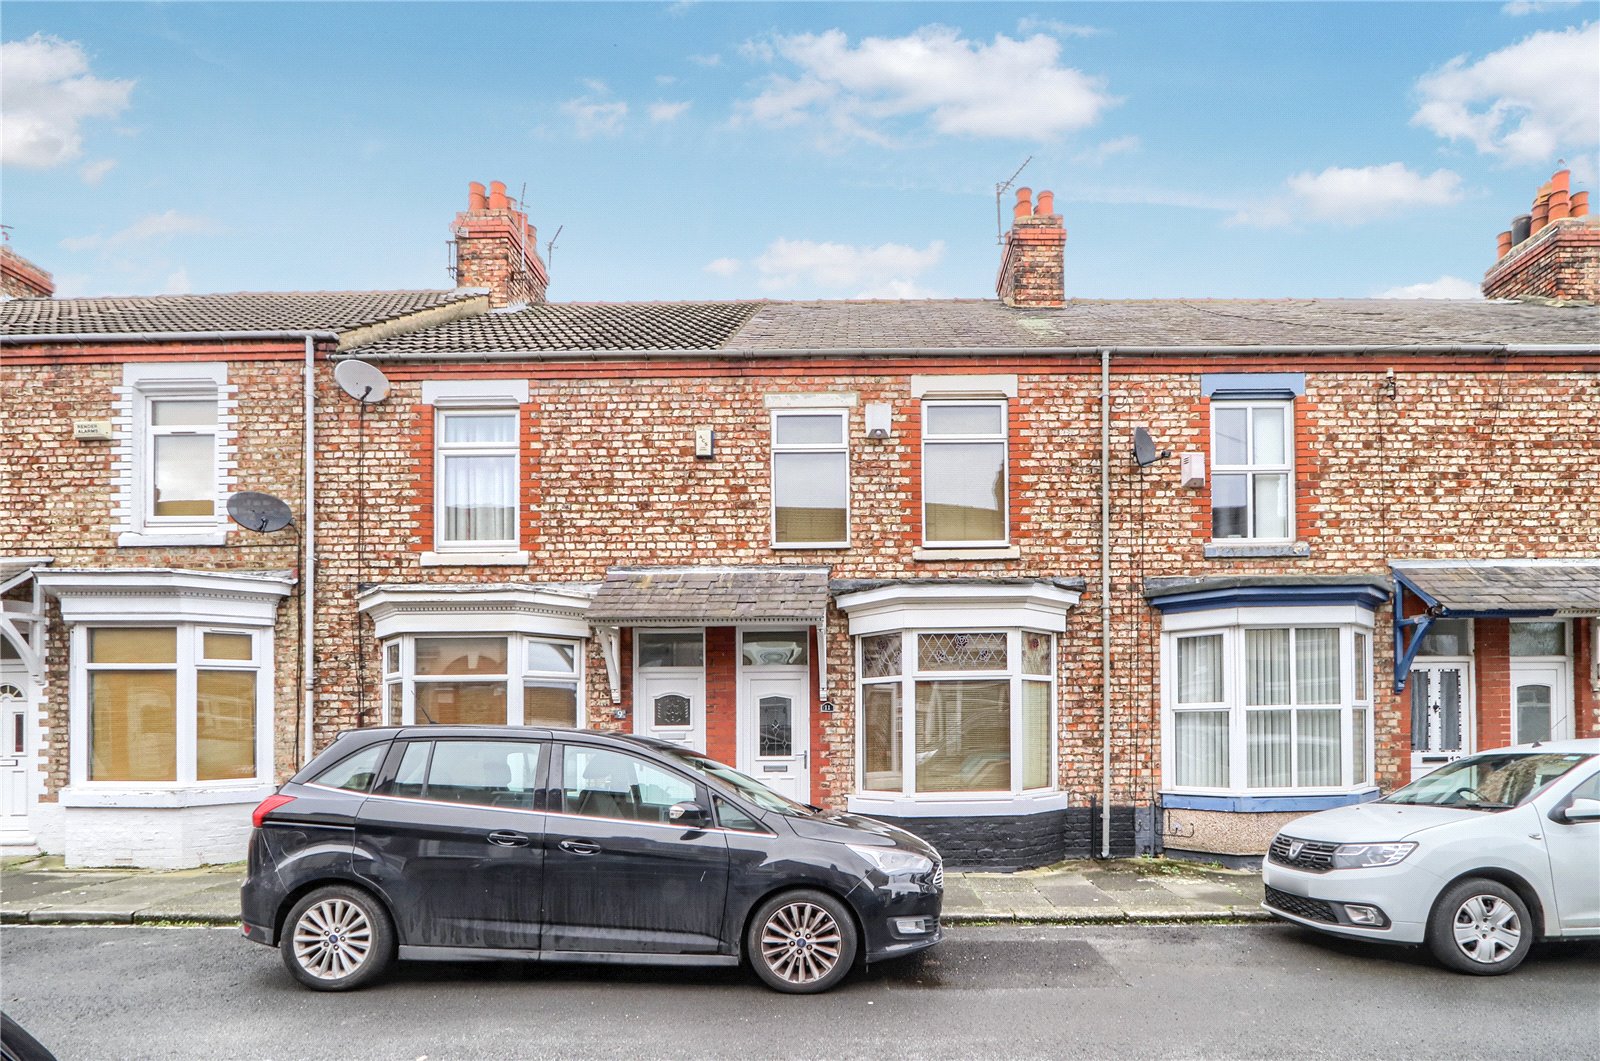 2 bed house for sale in Cross Street, Norton - Property Image 1